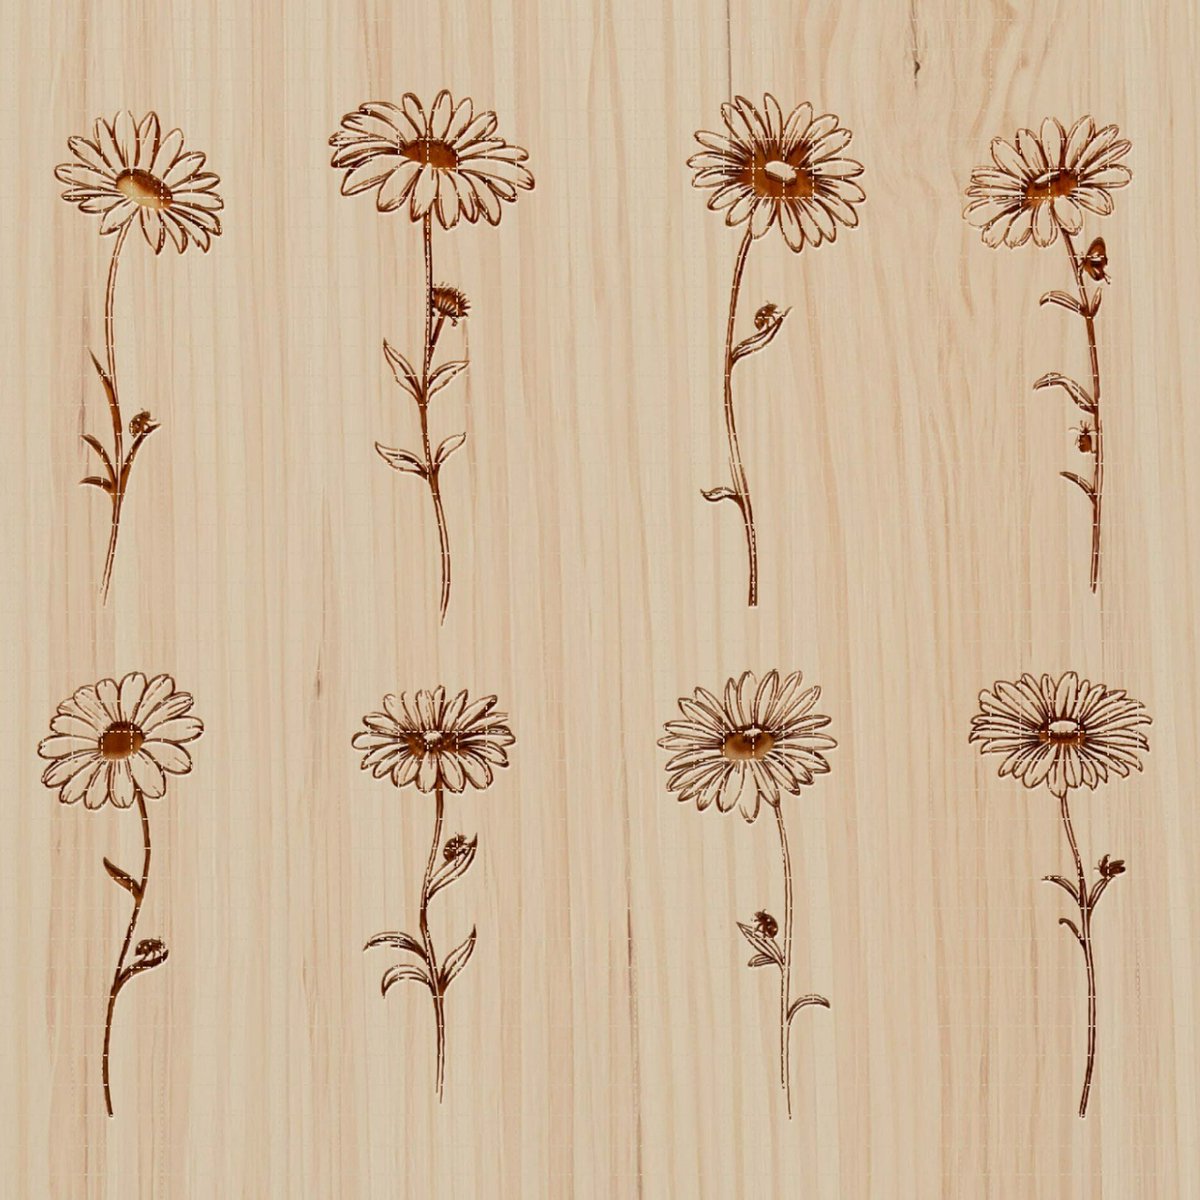 🌼✿ Awaken the beauty of nature in your projects with our beautiful flowers SVG files🌼✿

Download them now through the link 👇
etsy.com/listing/155429…

#wildflowersvg #wildflower #wildflowerbundle #wildflowersilhouette #wildflowerdesign #clipart #lasercut #lasercutter #flowers